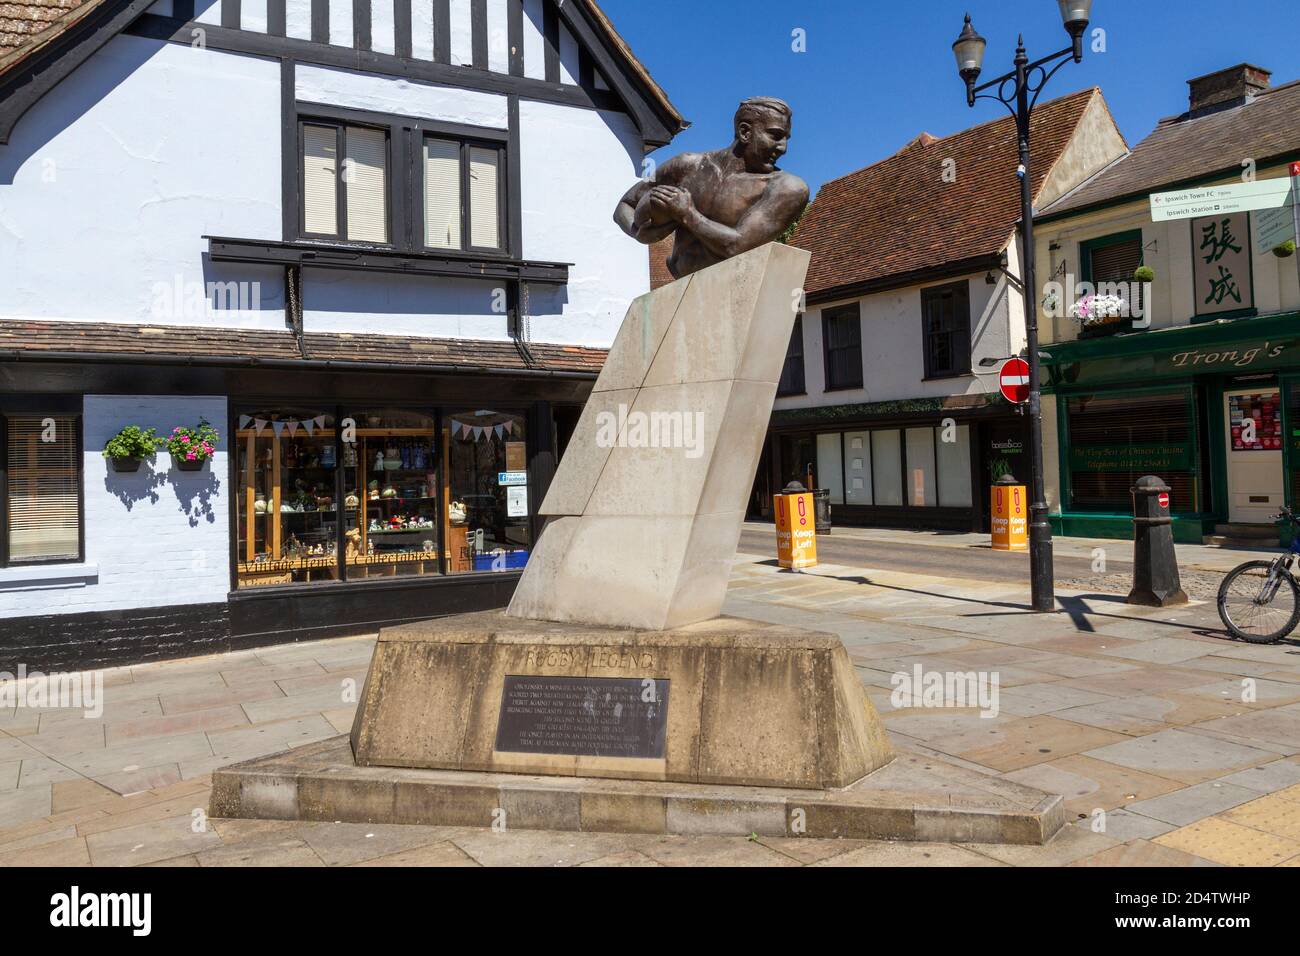 The bronze statue of England rugby legend Prince Alexander Obolensky  (by Harry Gray) on Cromwell Square, St. Nicholas Street, Ipswich, Suffolk, UK. Stock Photo